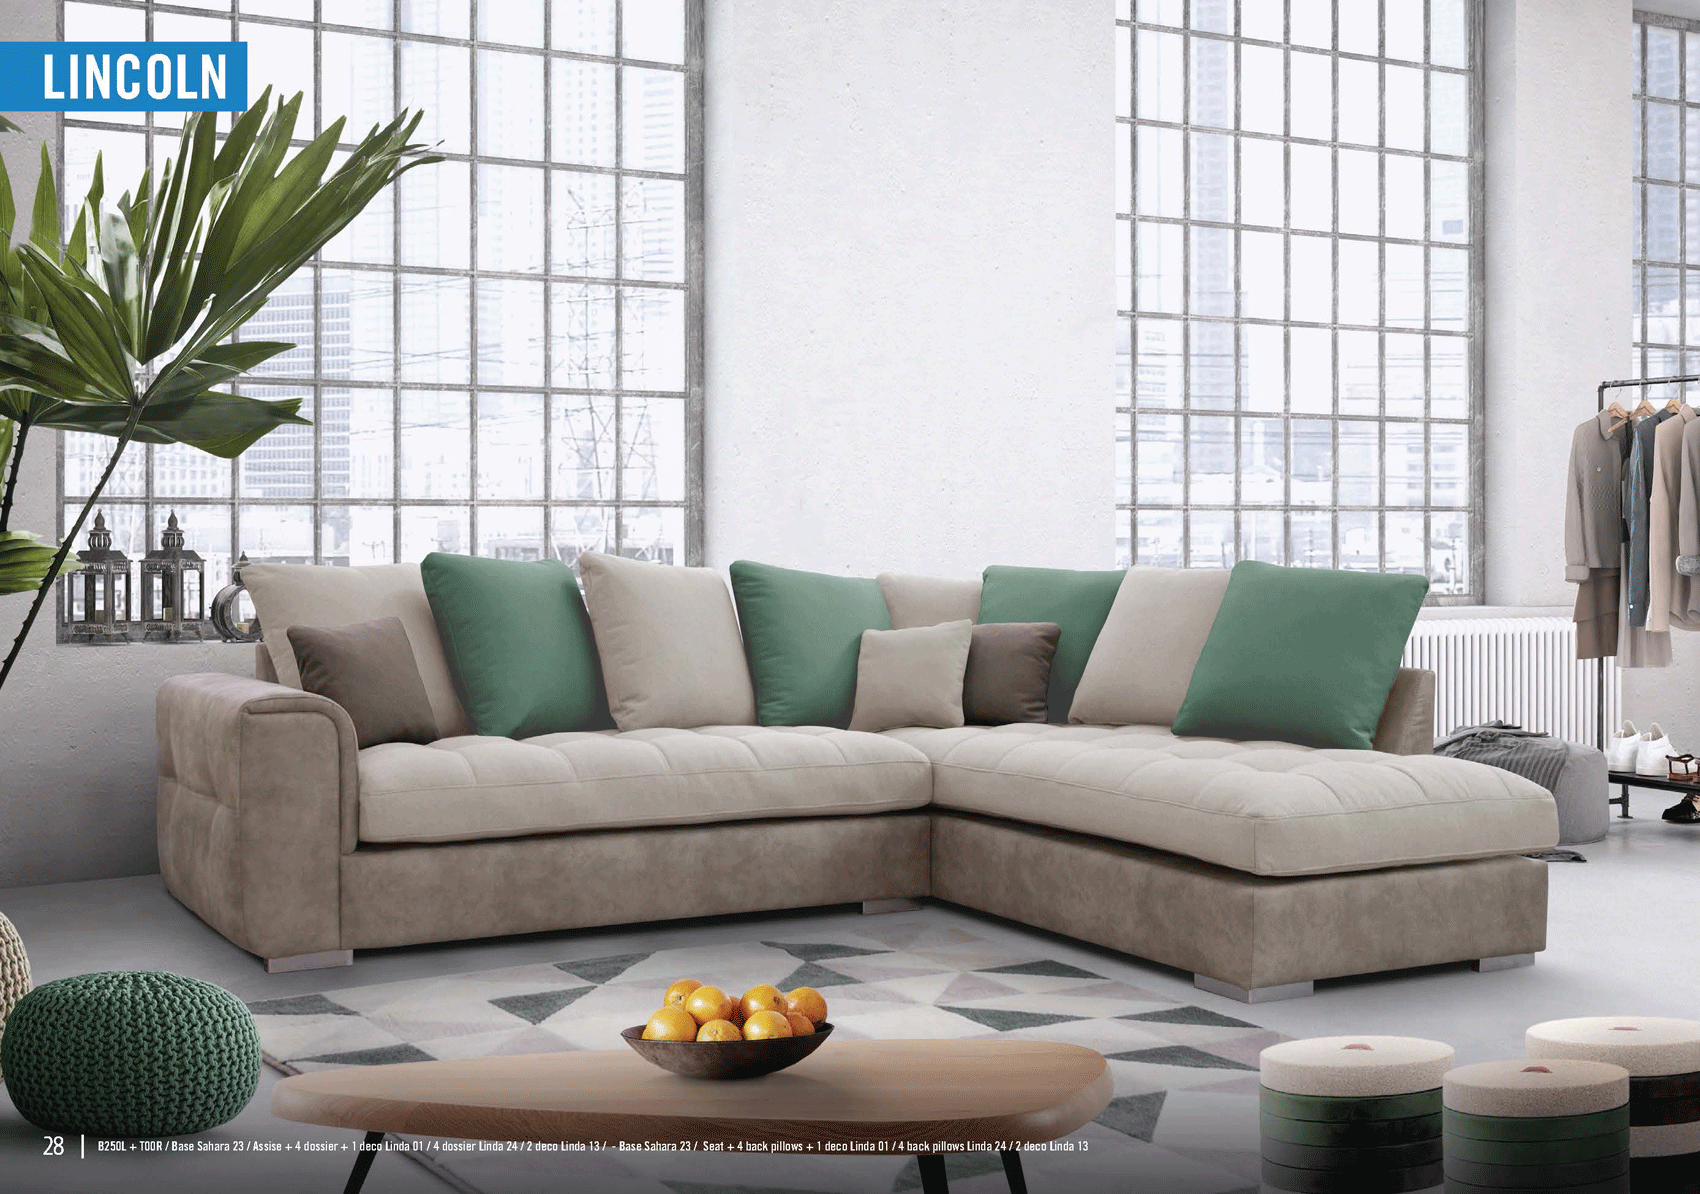 Bedroom Furniture Beds Lincoln Sectional